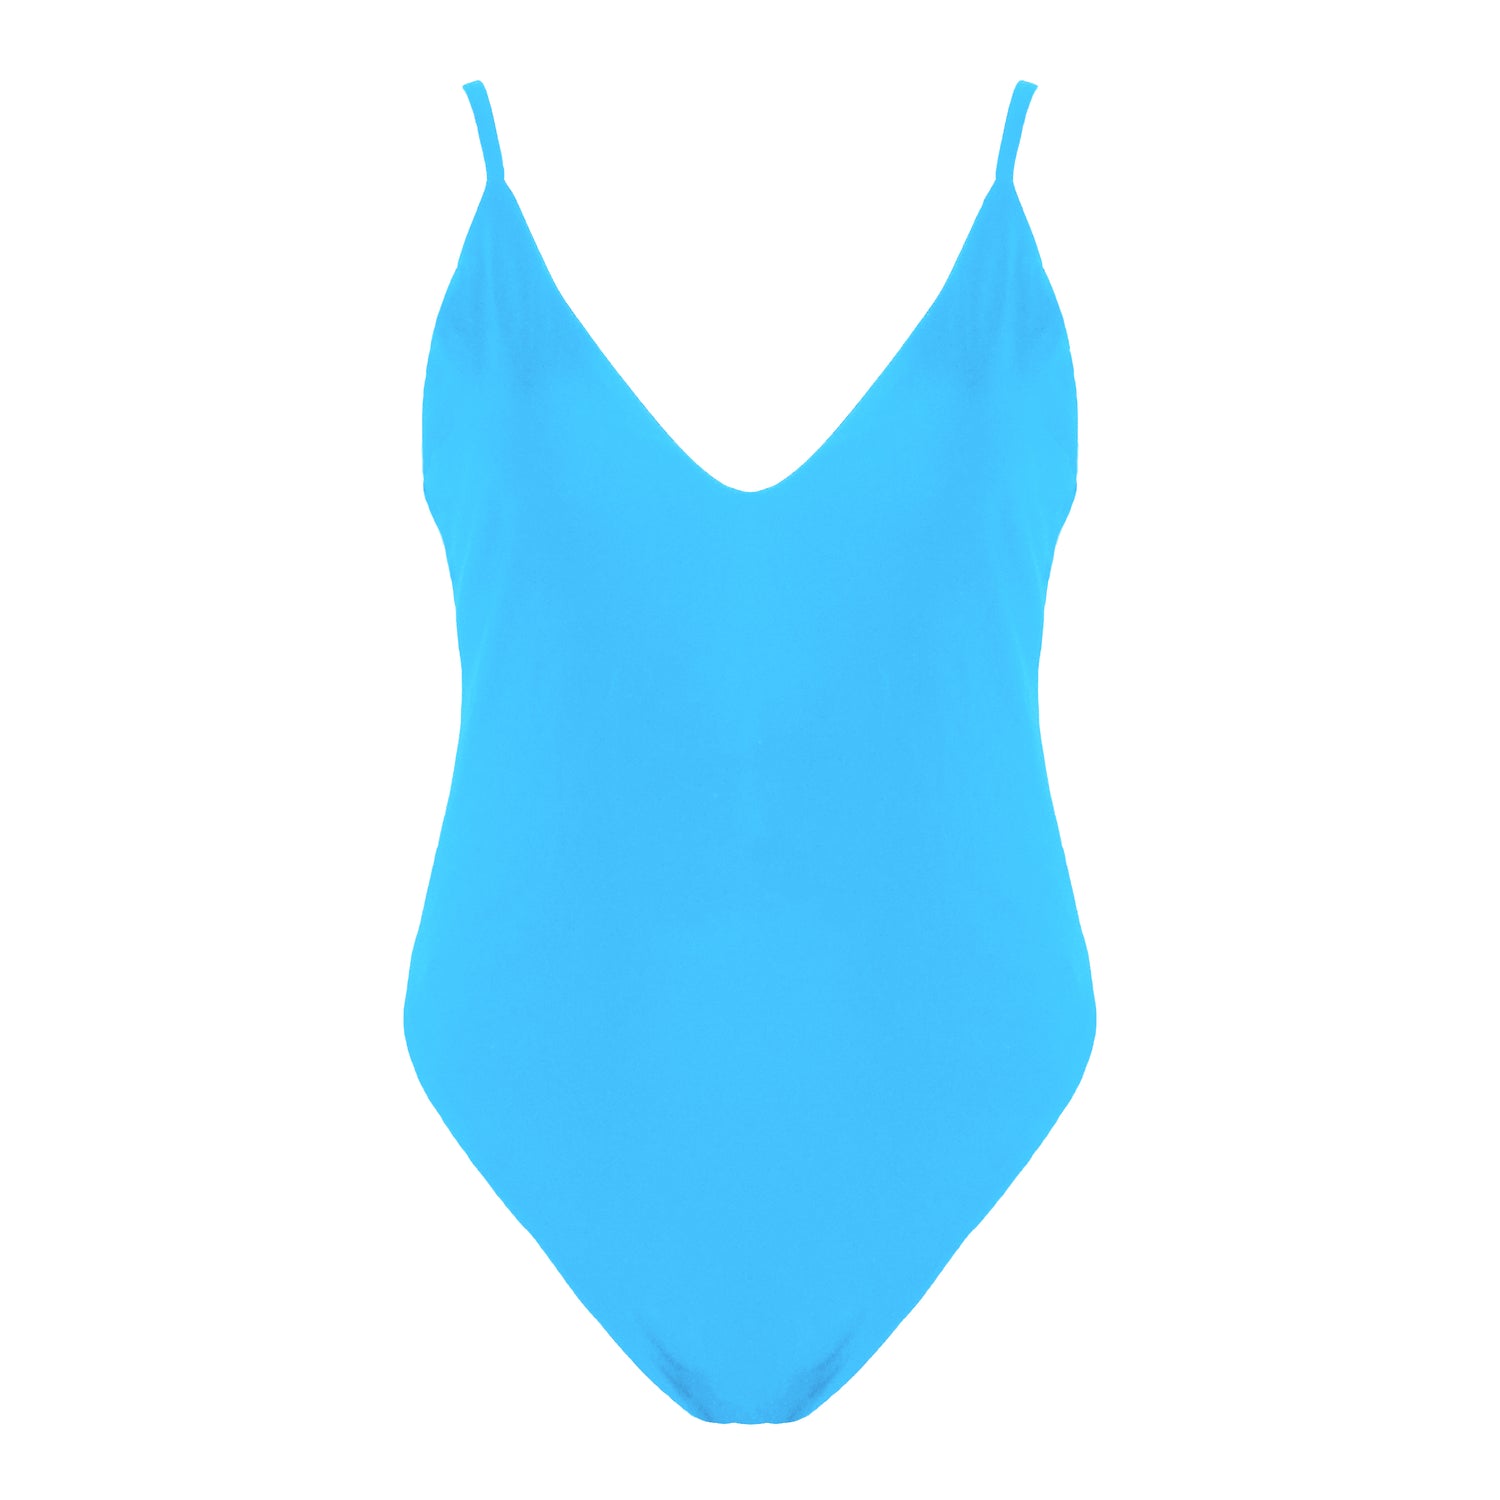 Acqua blue simplistic plunging v-neck one piece swimsuit with a low v-back, high cut legs and full coverage.